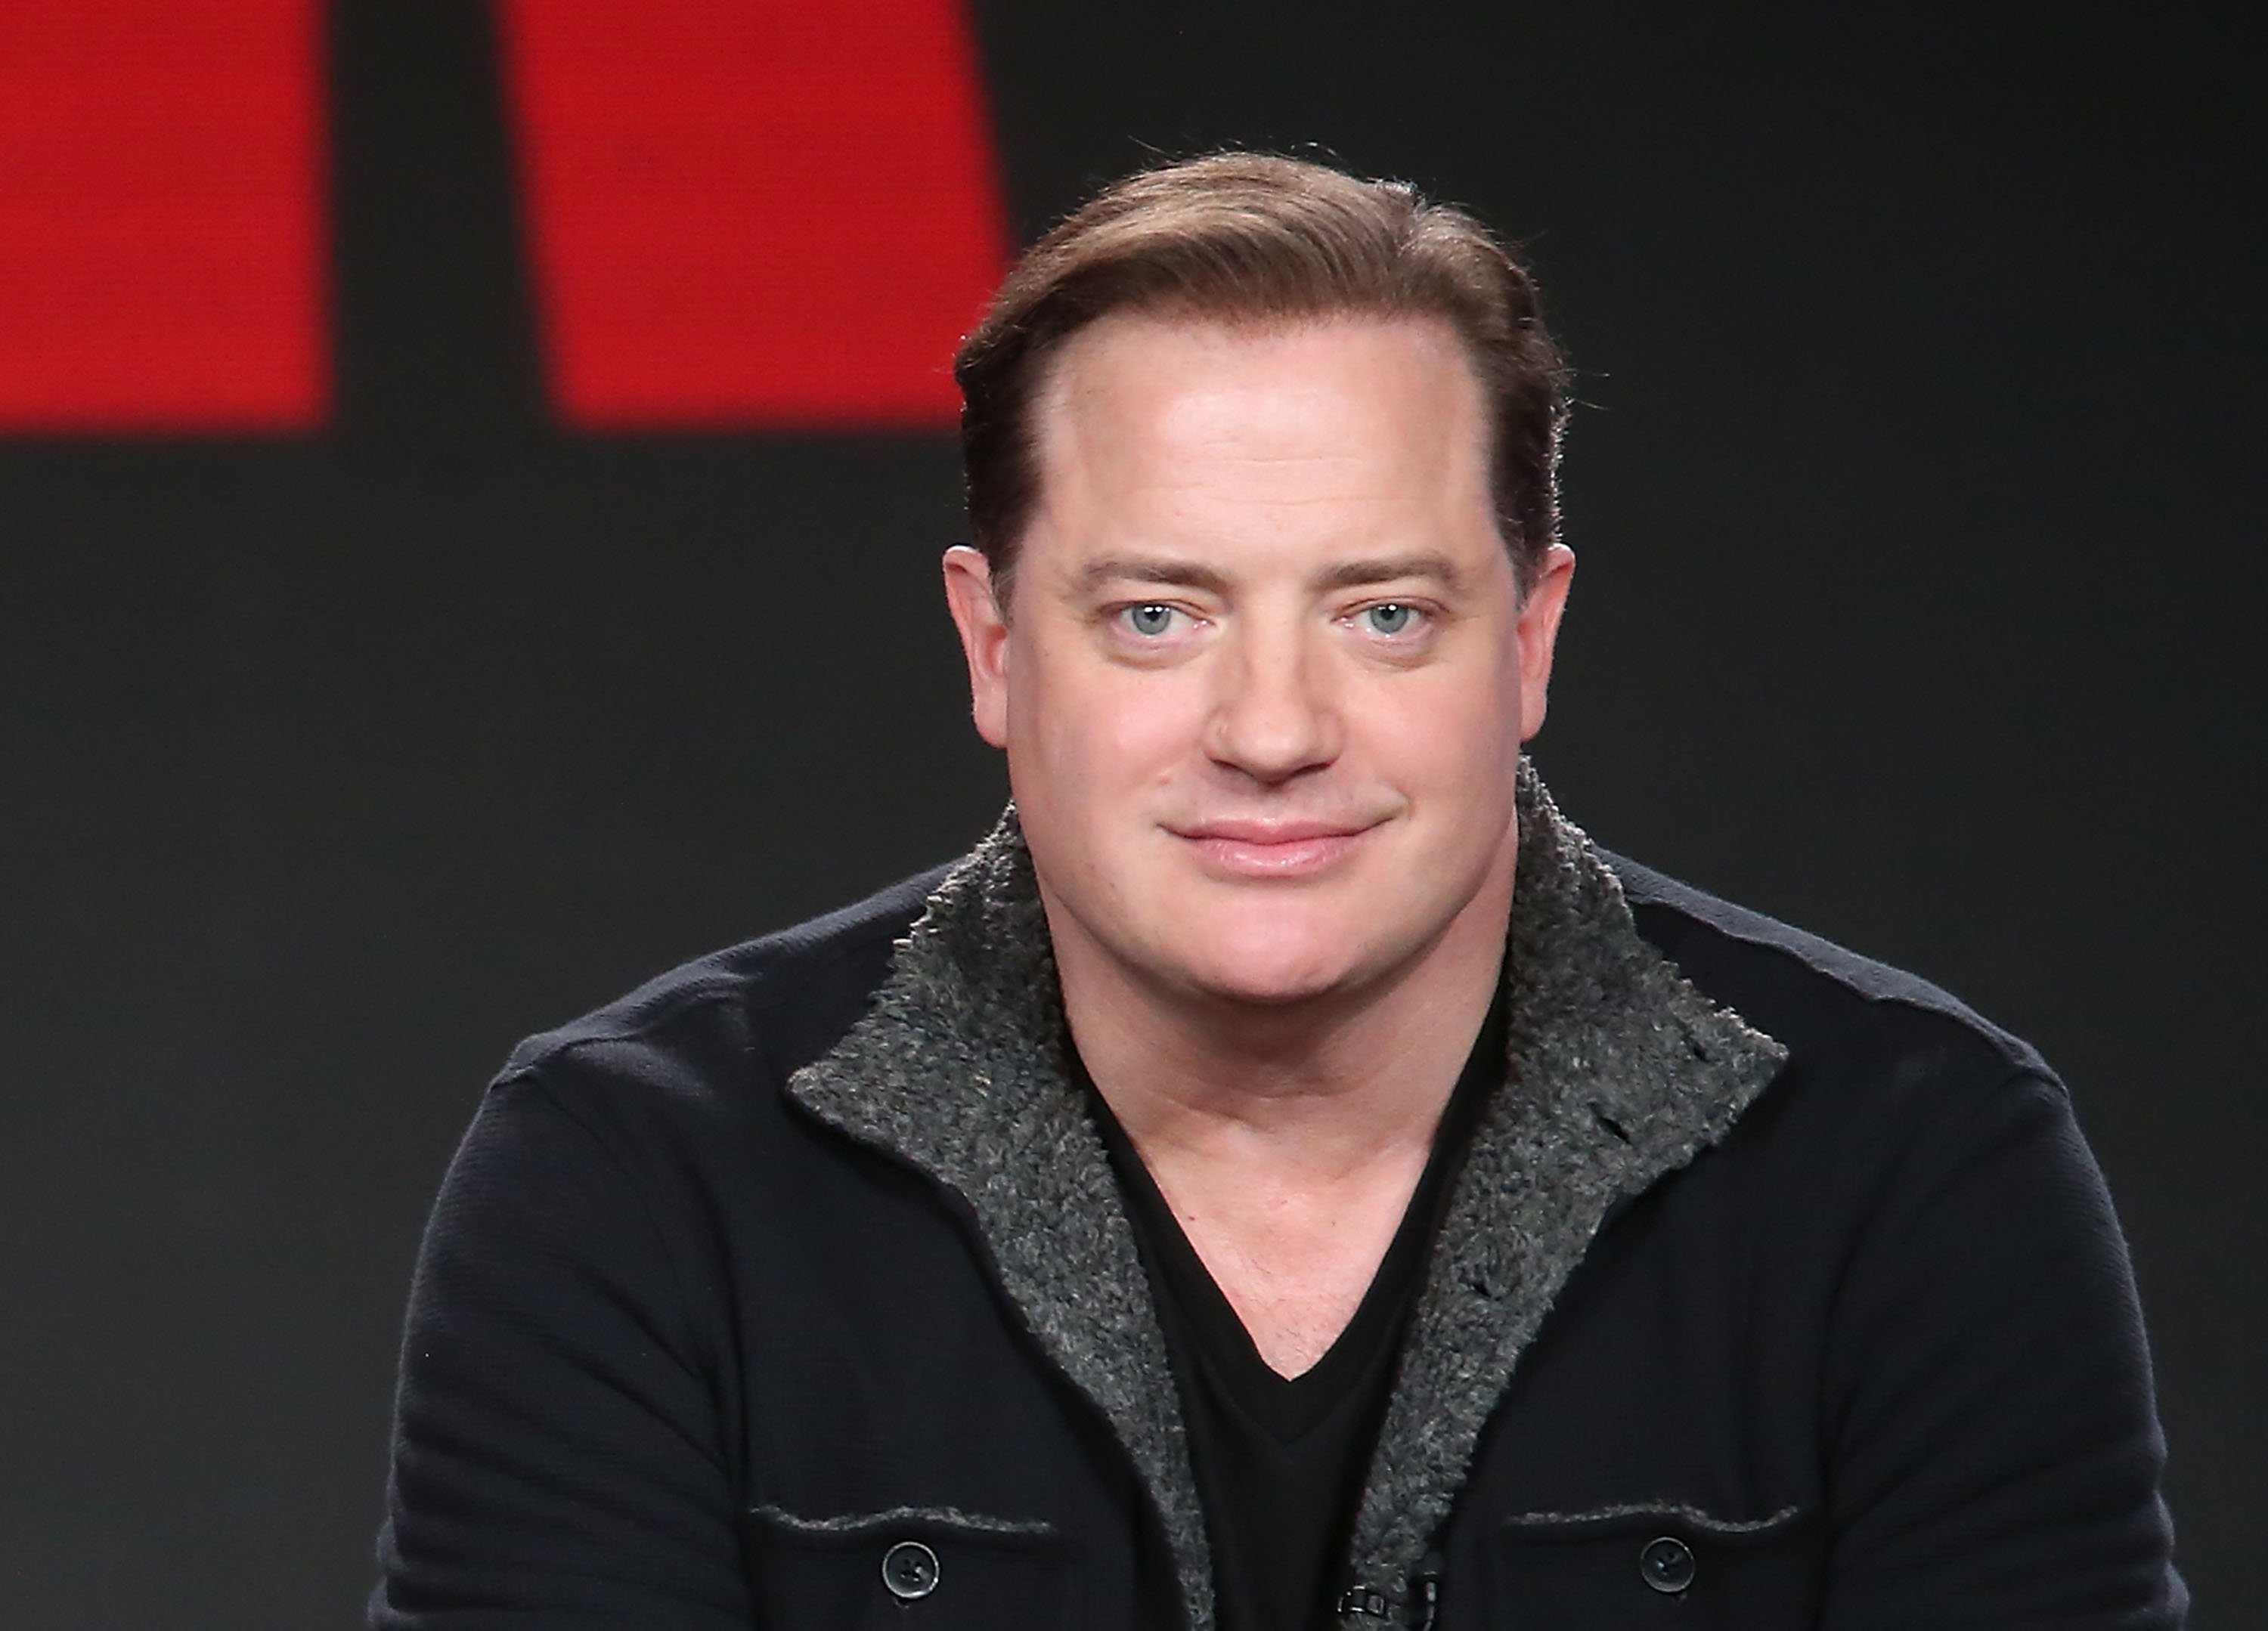 Brendan Fraser speaks onstage during the AT&T Audience Network portion of the 2018 Winter Television Critics Association Press Tour | Photo: Getty Images